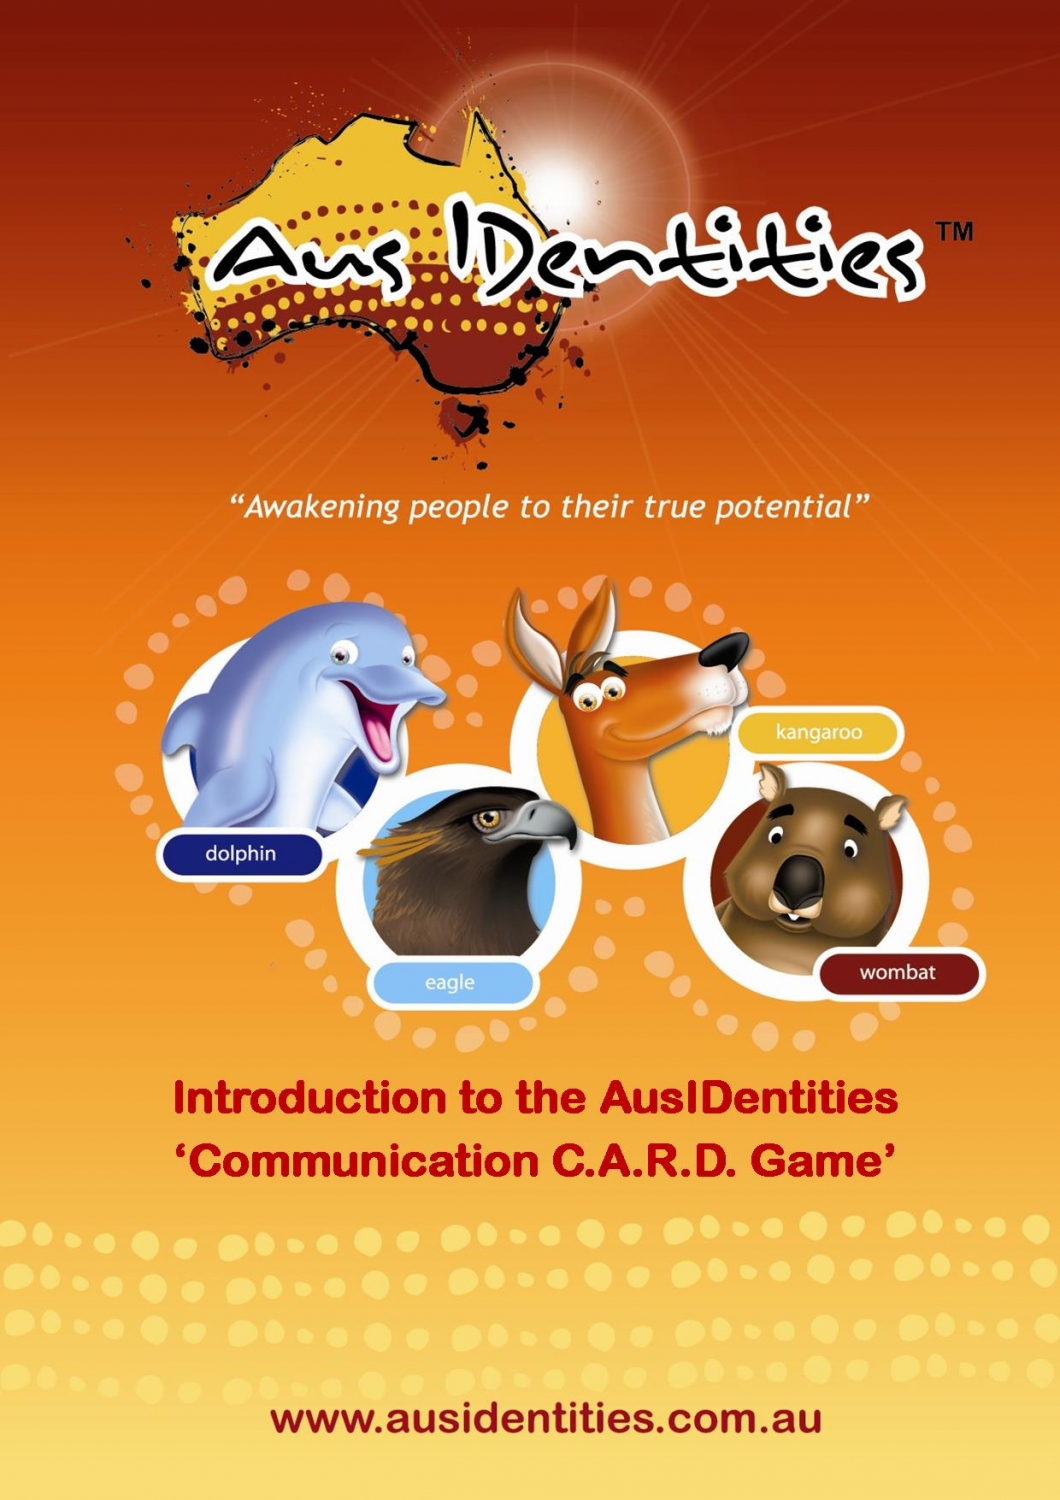 c-a-r-d-game-free-instructions-ausidentities